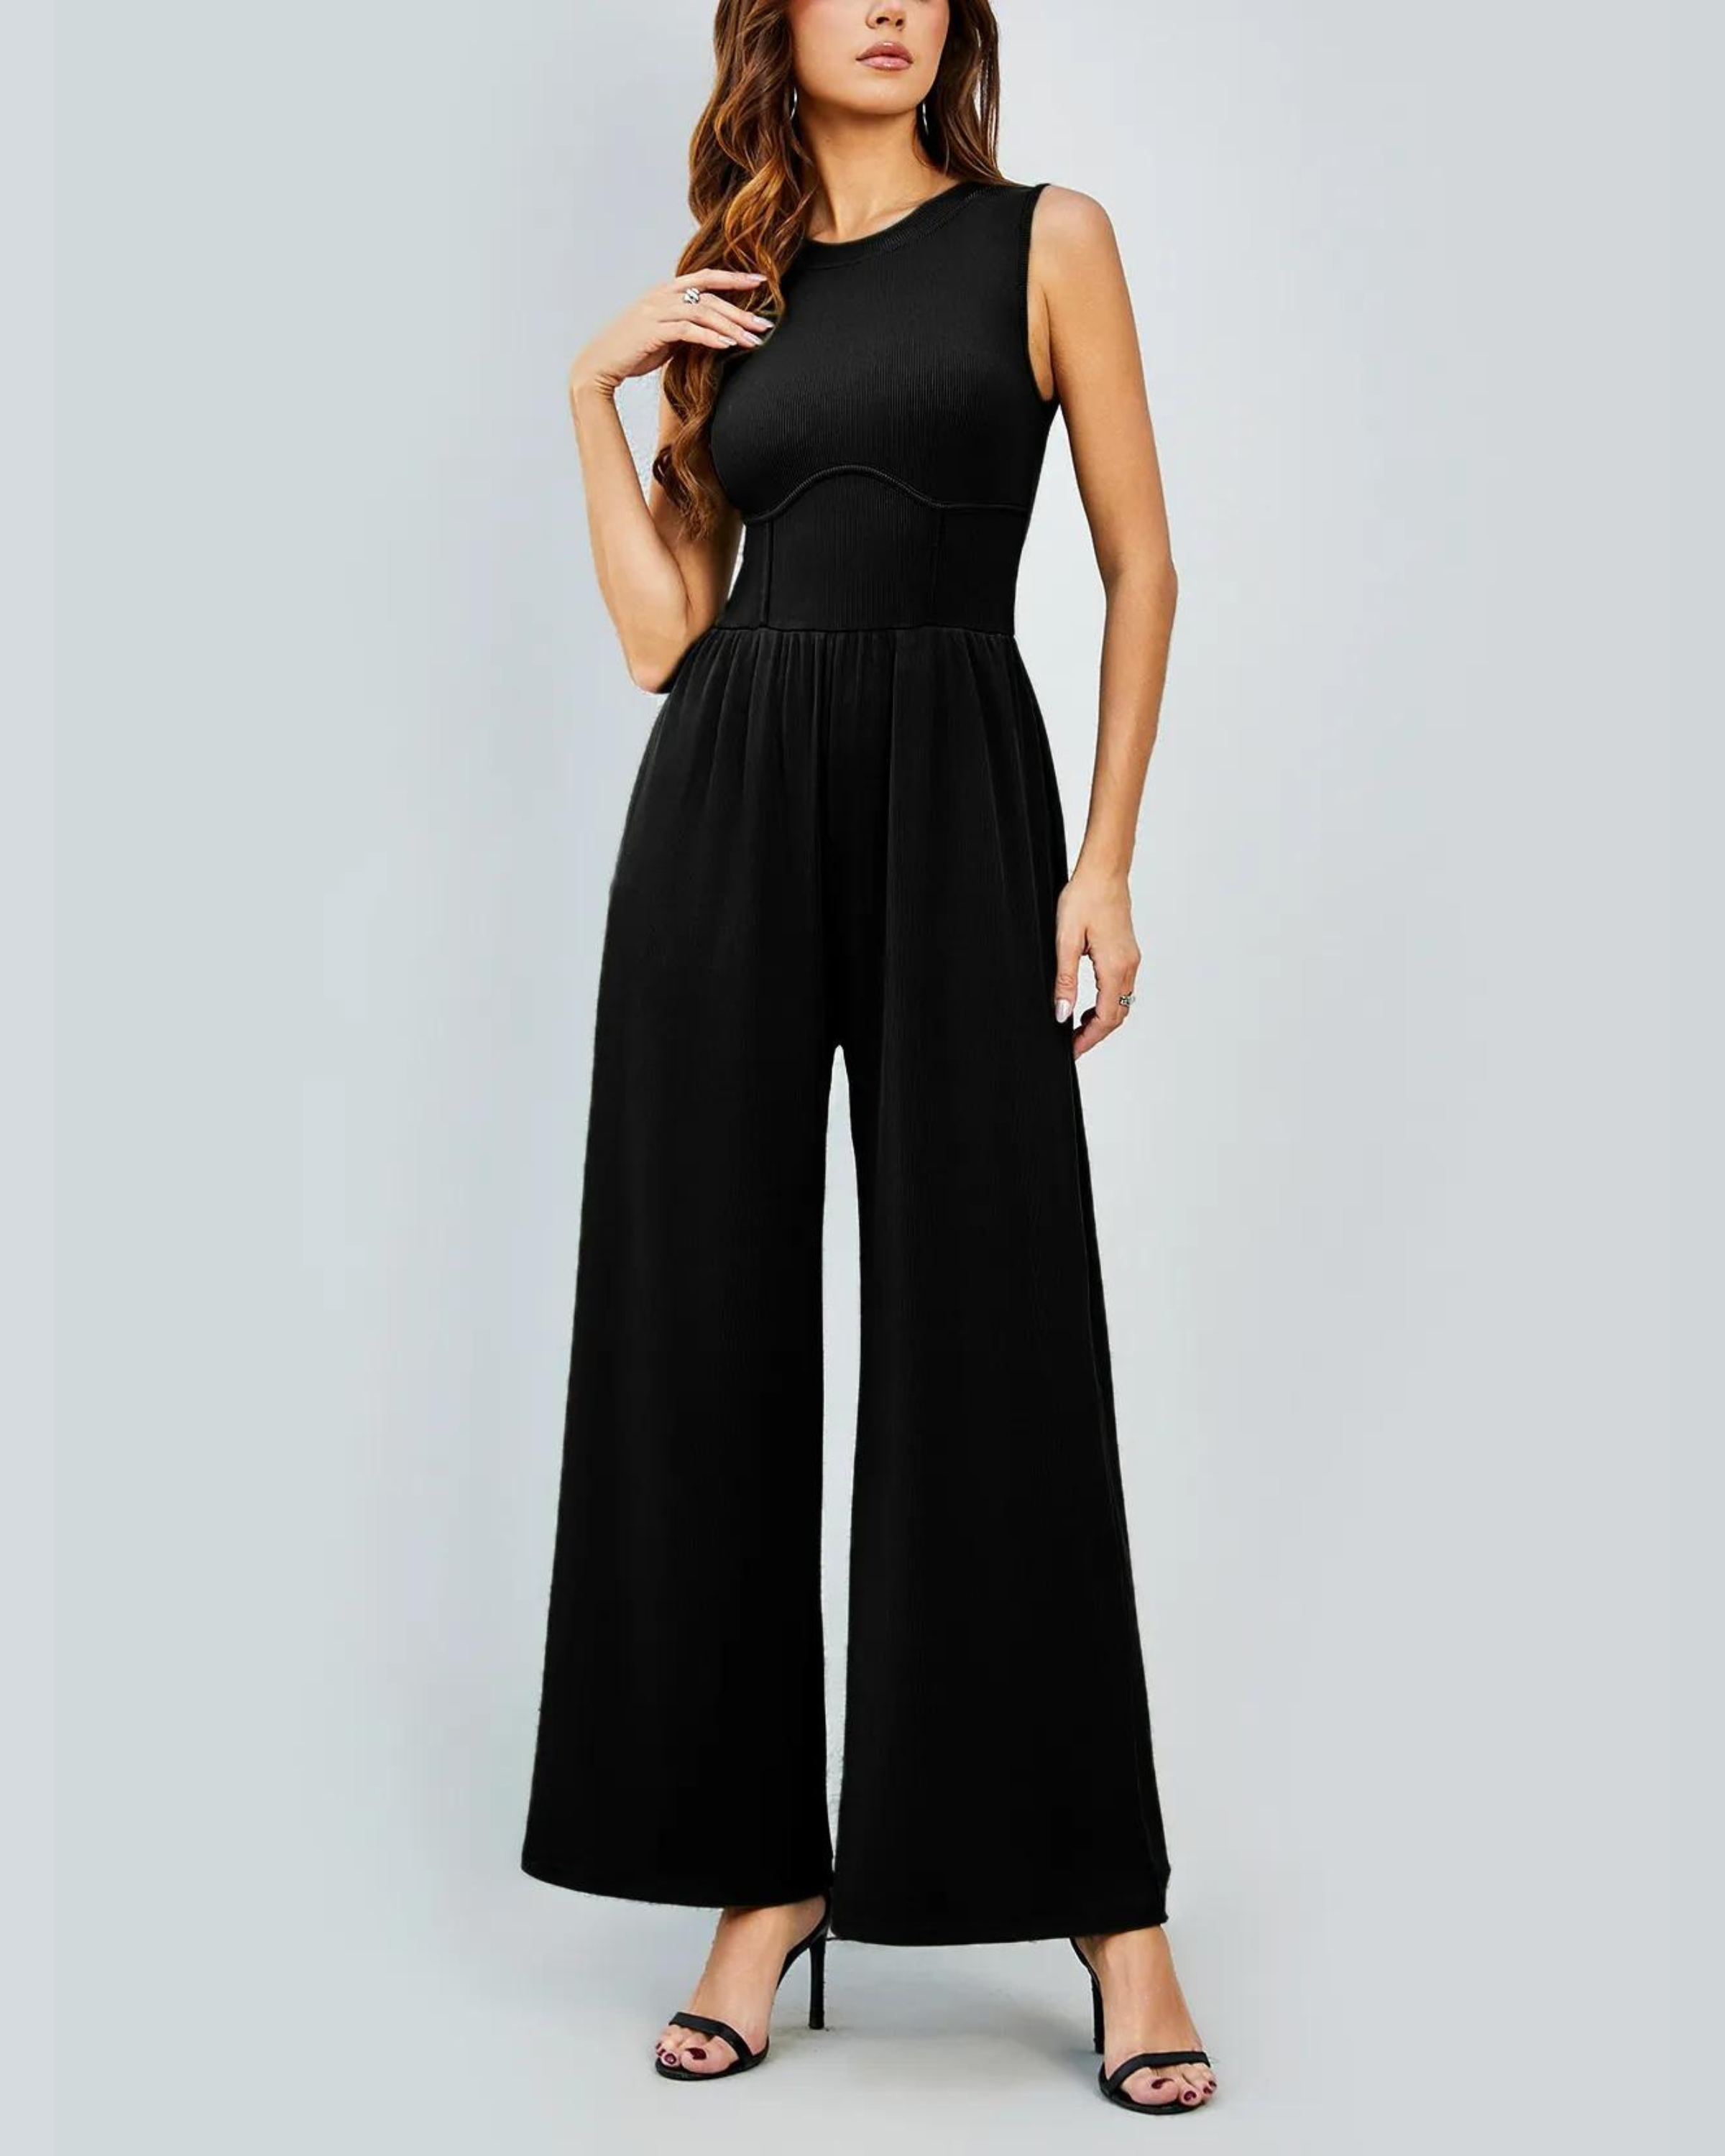 DIANA - CASUAL SUMMER JUMPSUIT